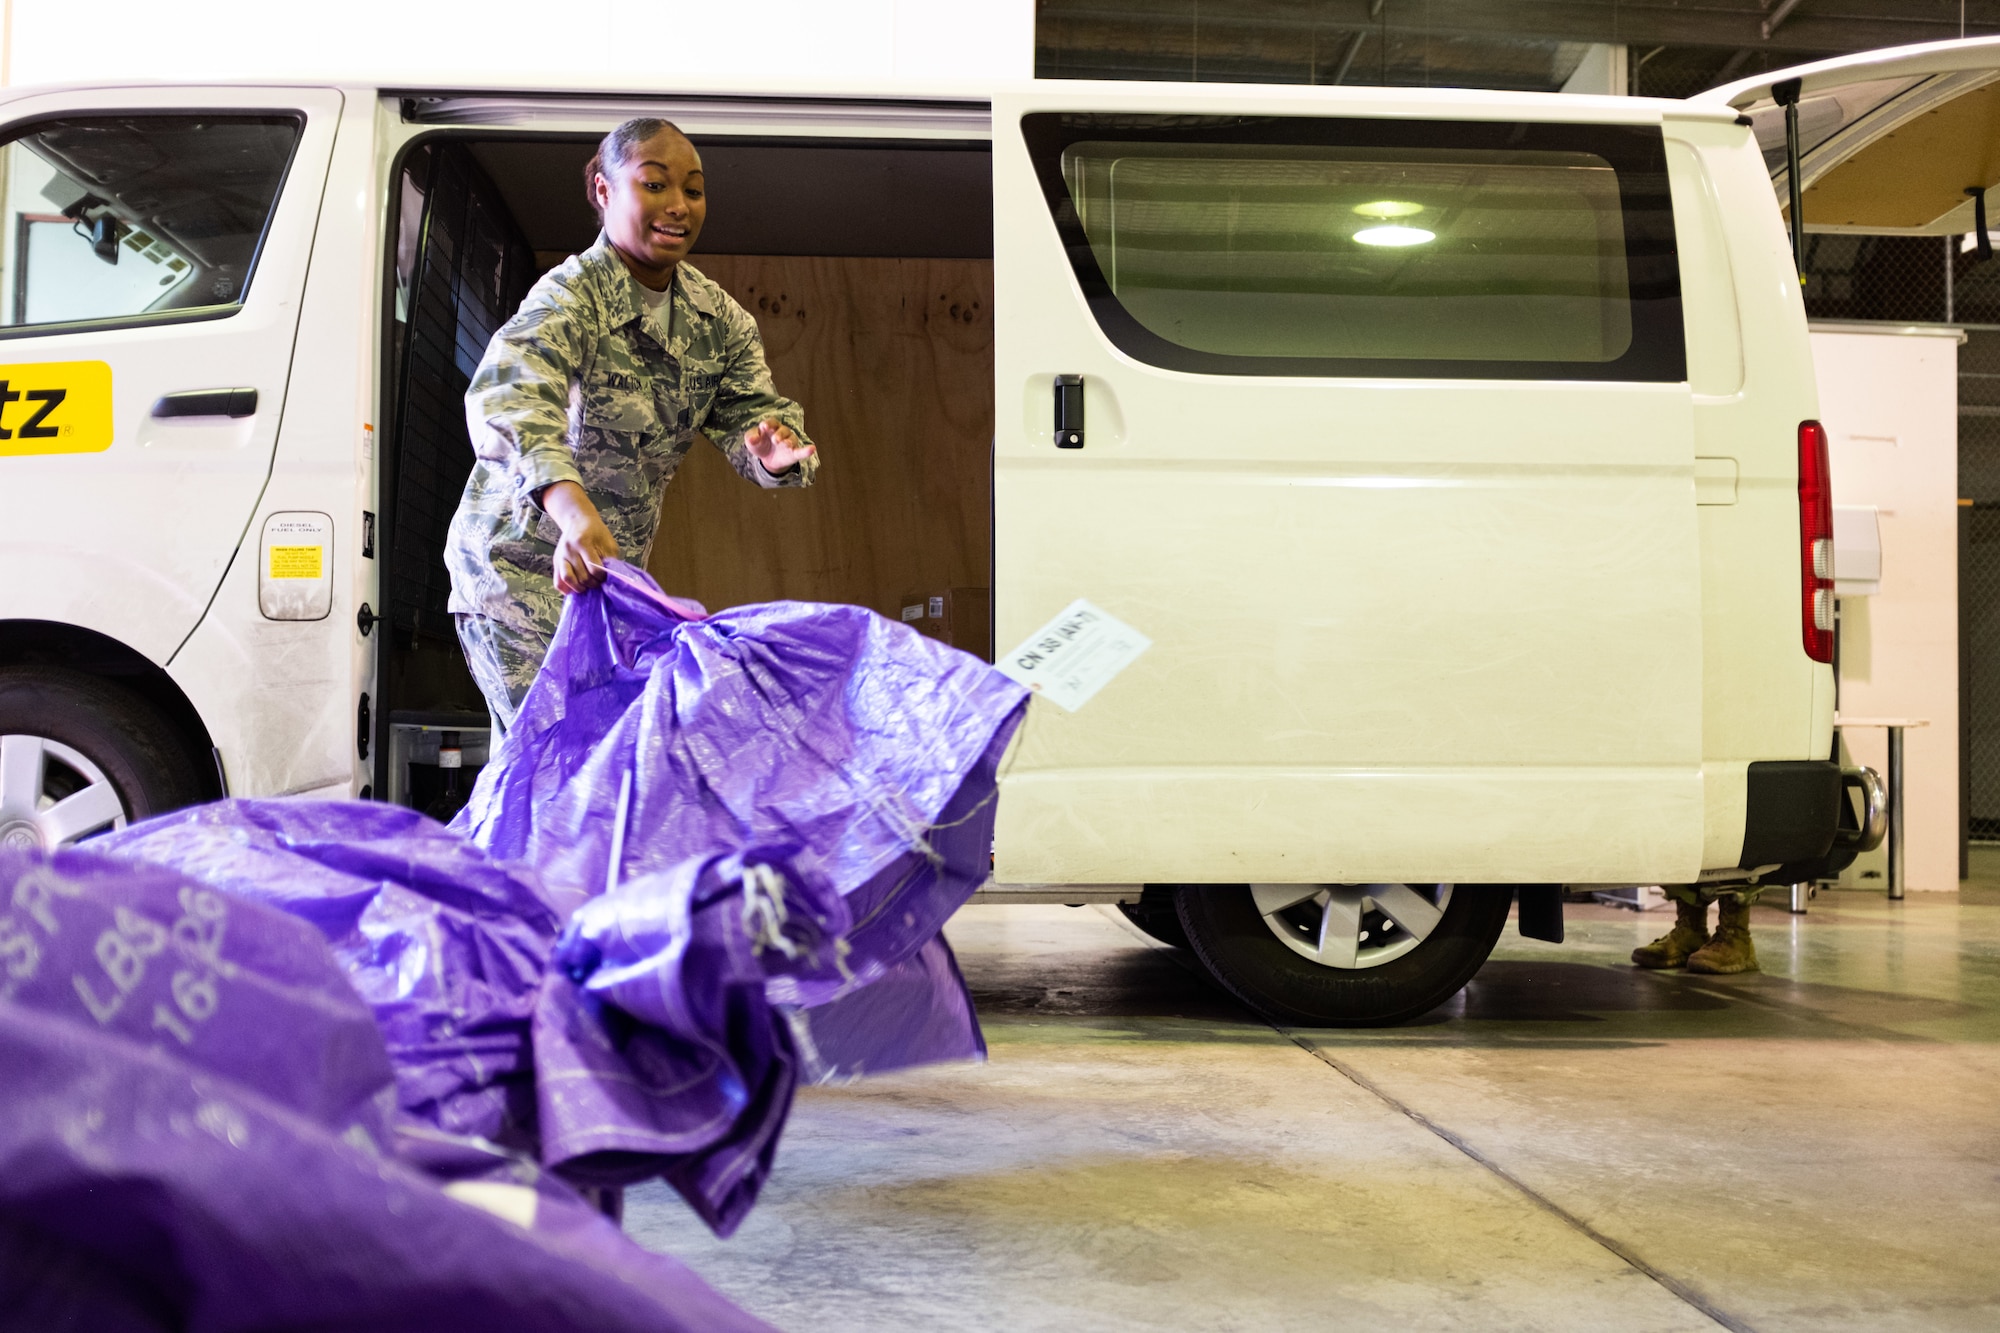 Tech. Sgt. Faneshia Walton, Pacific Air Forces Air Postal Squadron Det 4 aerial mail terminal chief, sorts incoming mail at the mail warehouse in Sydney, August 24, 2019. The detachment is responsible for delivering mail to government employees and their families located across an area of more than 3 million square miles. (U.S. Air Force Photo Illustration by Master Sgt. Benjamin Wilson)